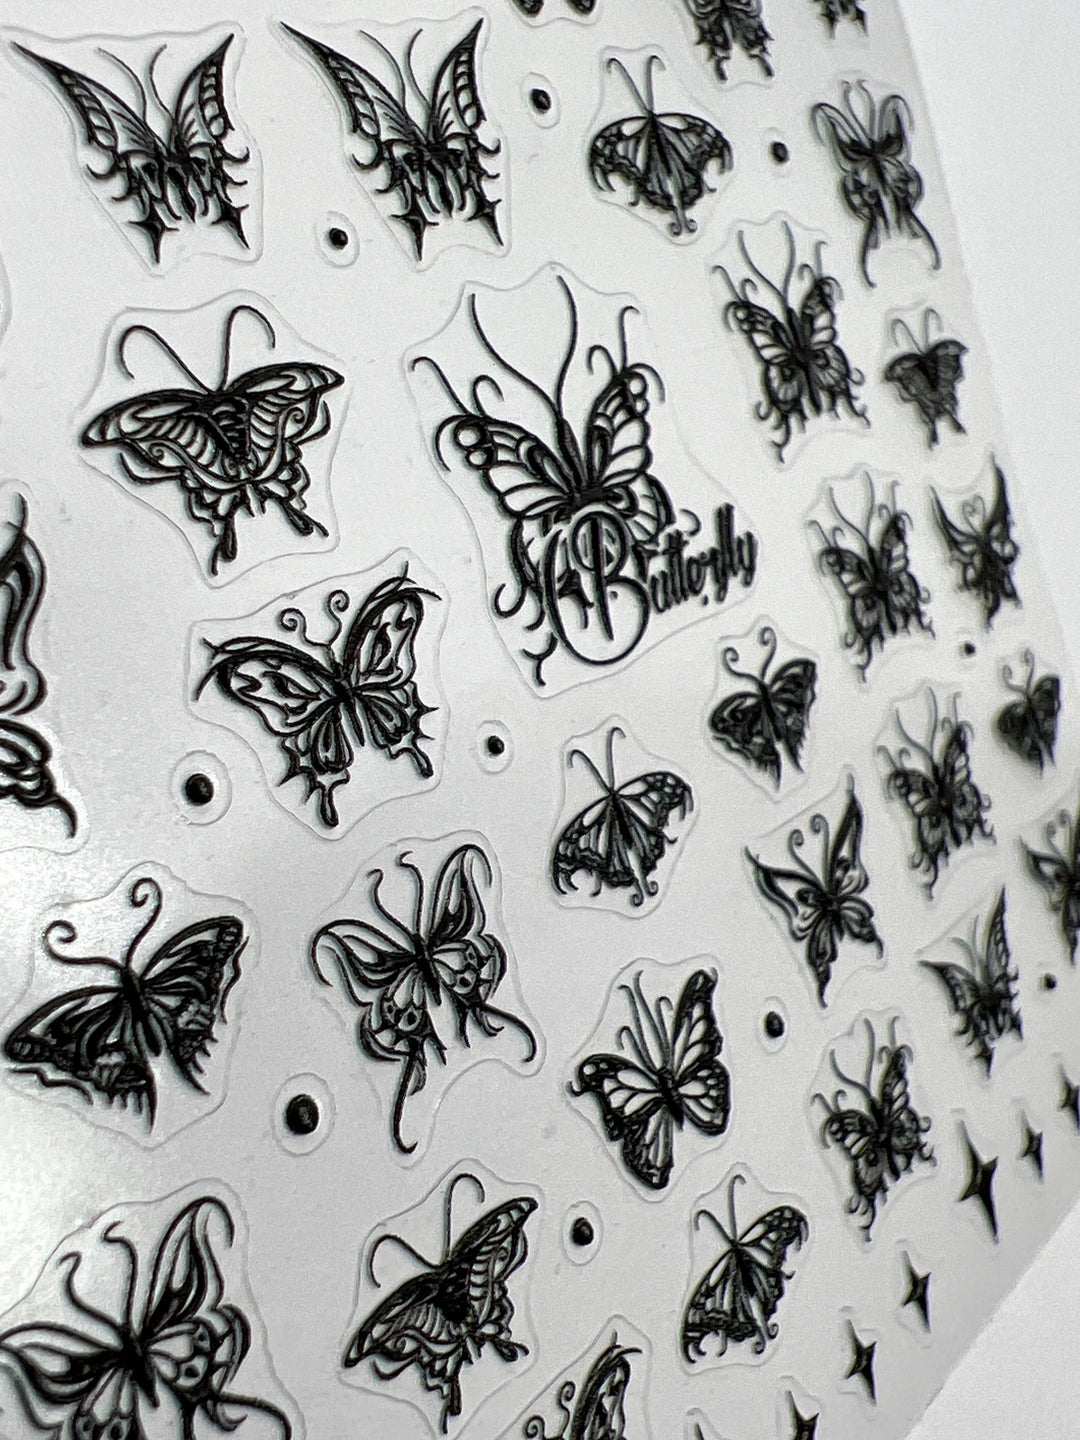 Tattoo Butterfly Decals